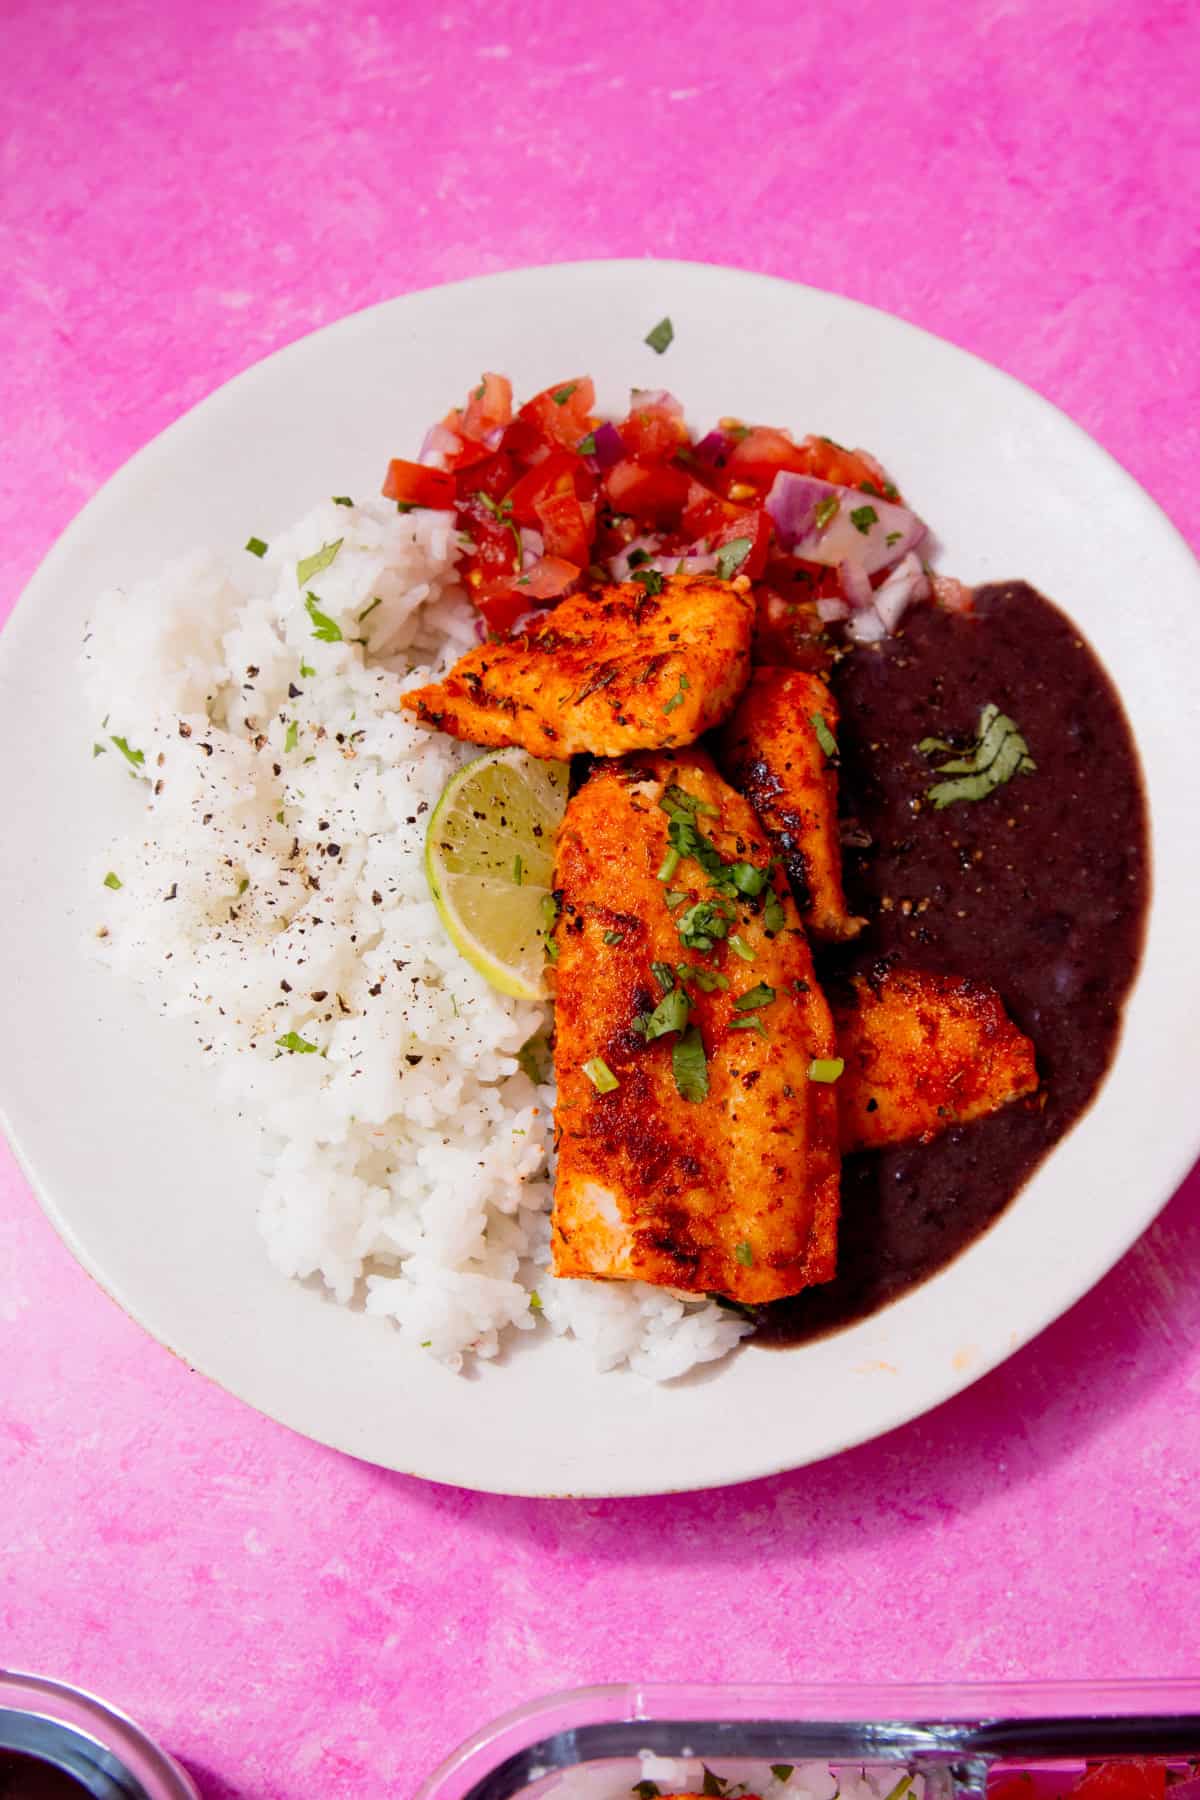 A plate with browned fish, black bean sauce, white rice and a tomato salad on a pink background.